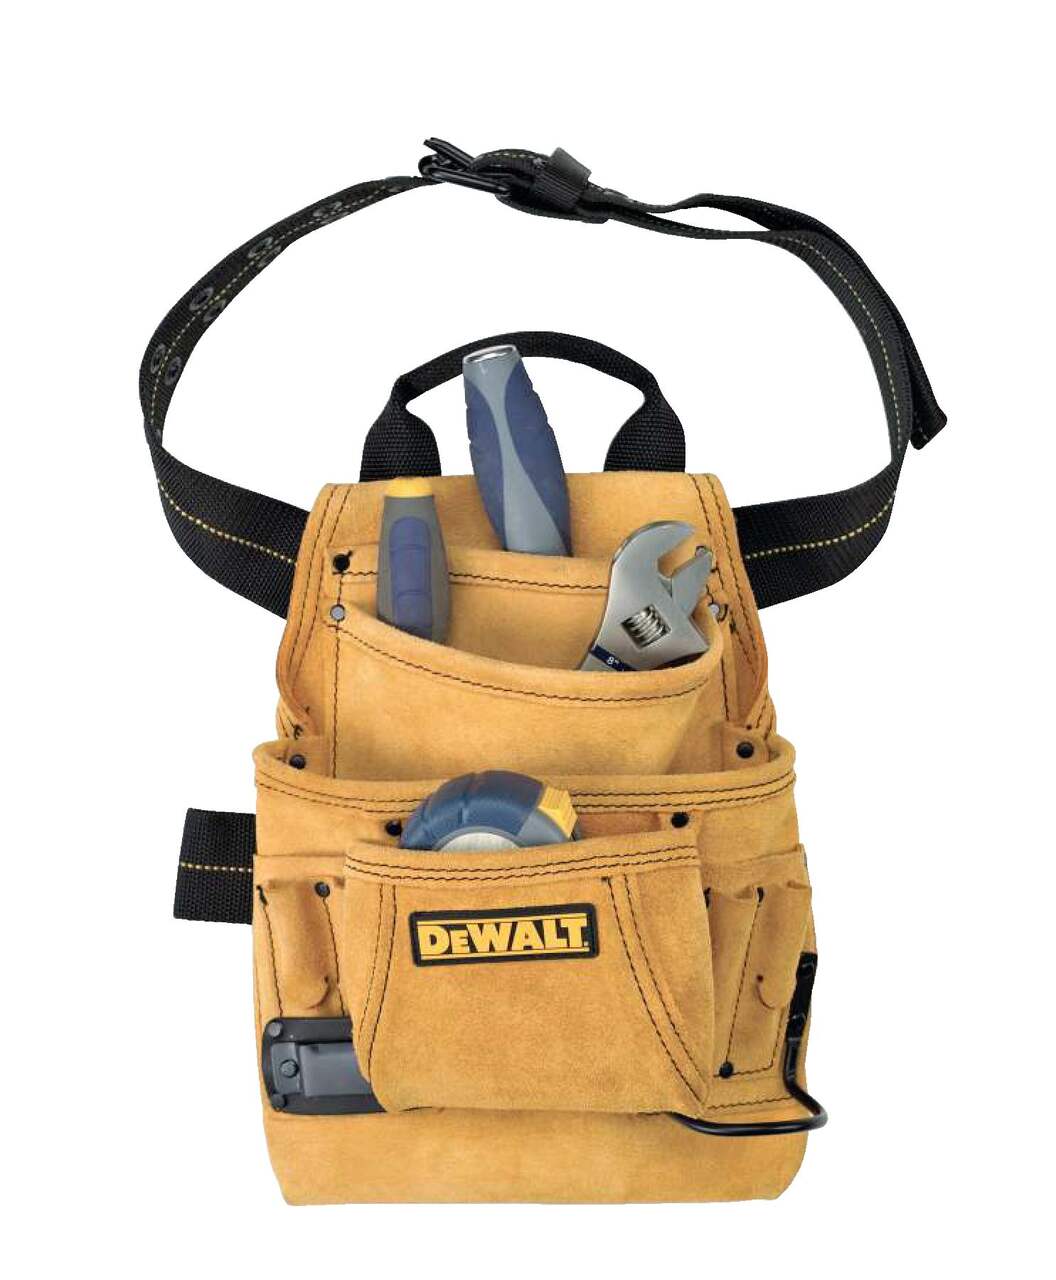 https://media-www.canadiantire.ca/product/fixing/tools/tool-storage/0570157/dewalt-10pocket-nail-and-tool-pouch-94aaea77-52cc-45a5-9669-038d52aae7d6-jpgrendition.jpg?imdensity=1&imwidth=640&impolicy=mZoom